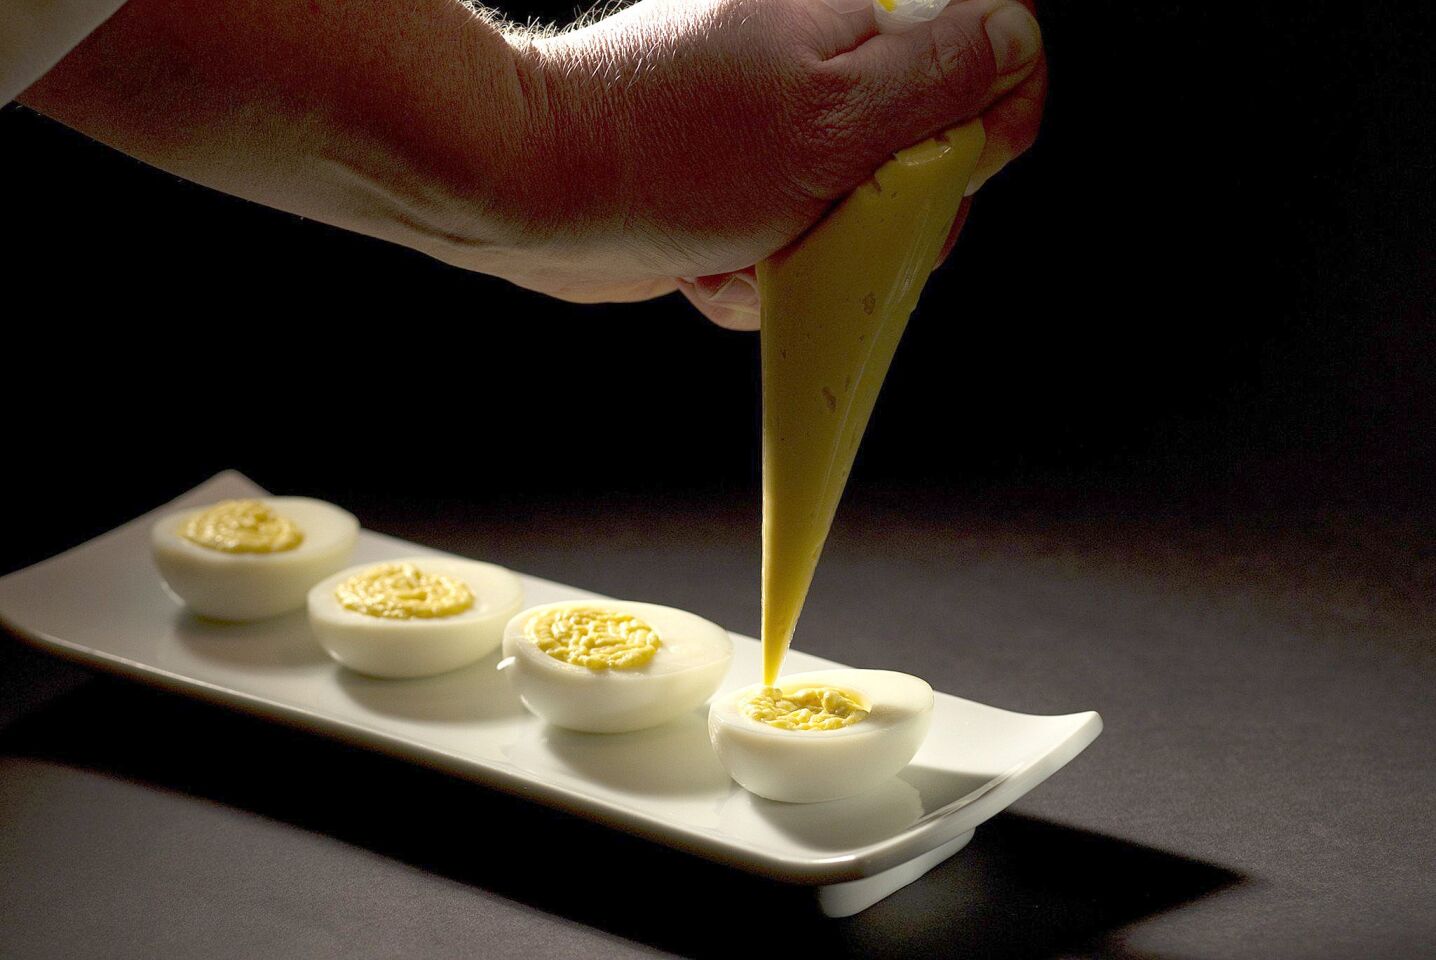 To show off the quality of expensive caviar, serve it atop deviled eggs. Recipe: Deviled eggs with caviar